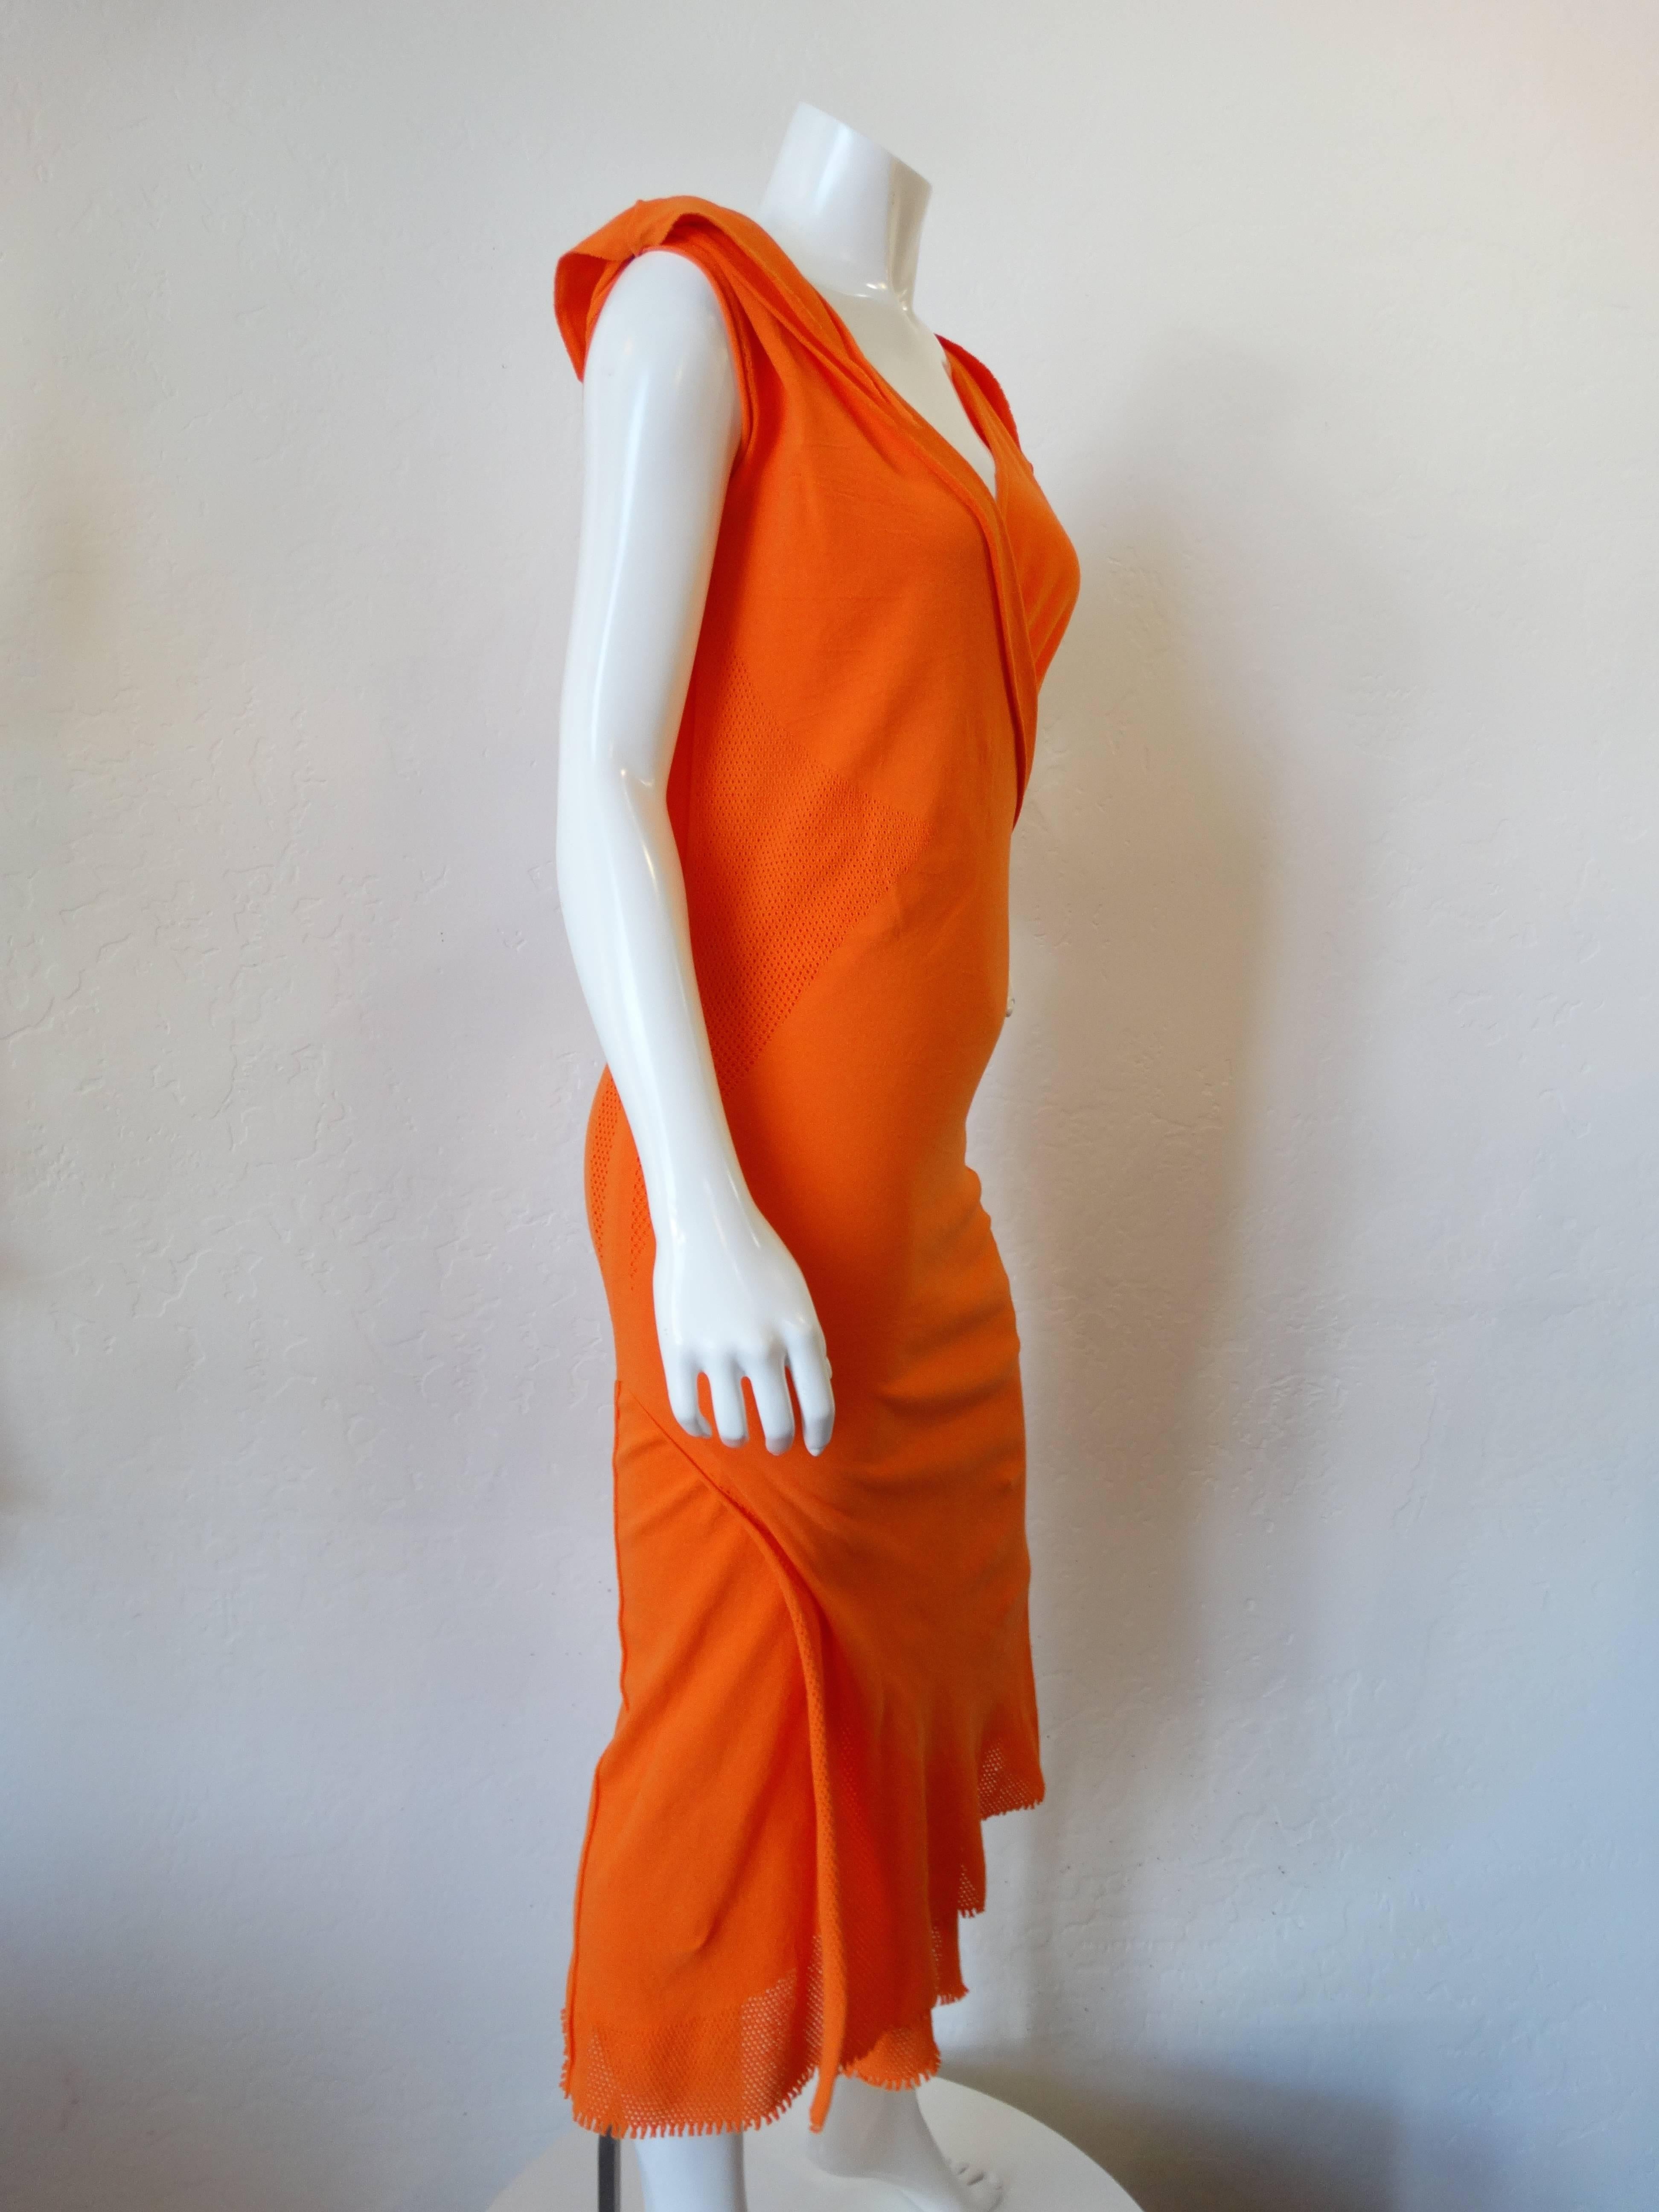 Fabulous 2005 A-POC BY ISSEY MIYAKE AND DAI FUJIWARA in a brilliant orange. 2 pieces of fabric layered over one and other. Miyake “A-POC” is an acronym for “A Piece of Cloth” and refers too, to the idea of “epoch.” It is a manufacturing method that